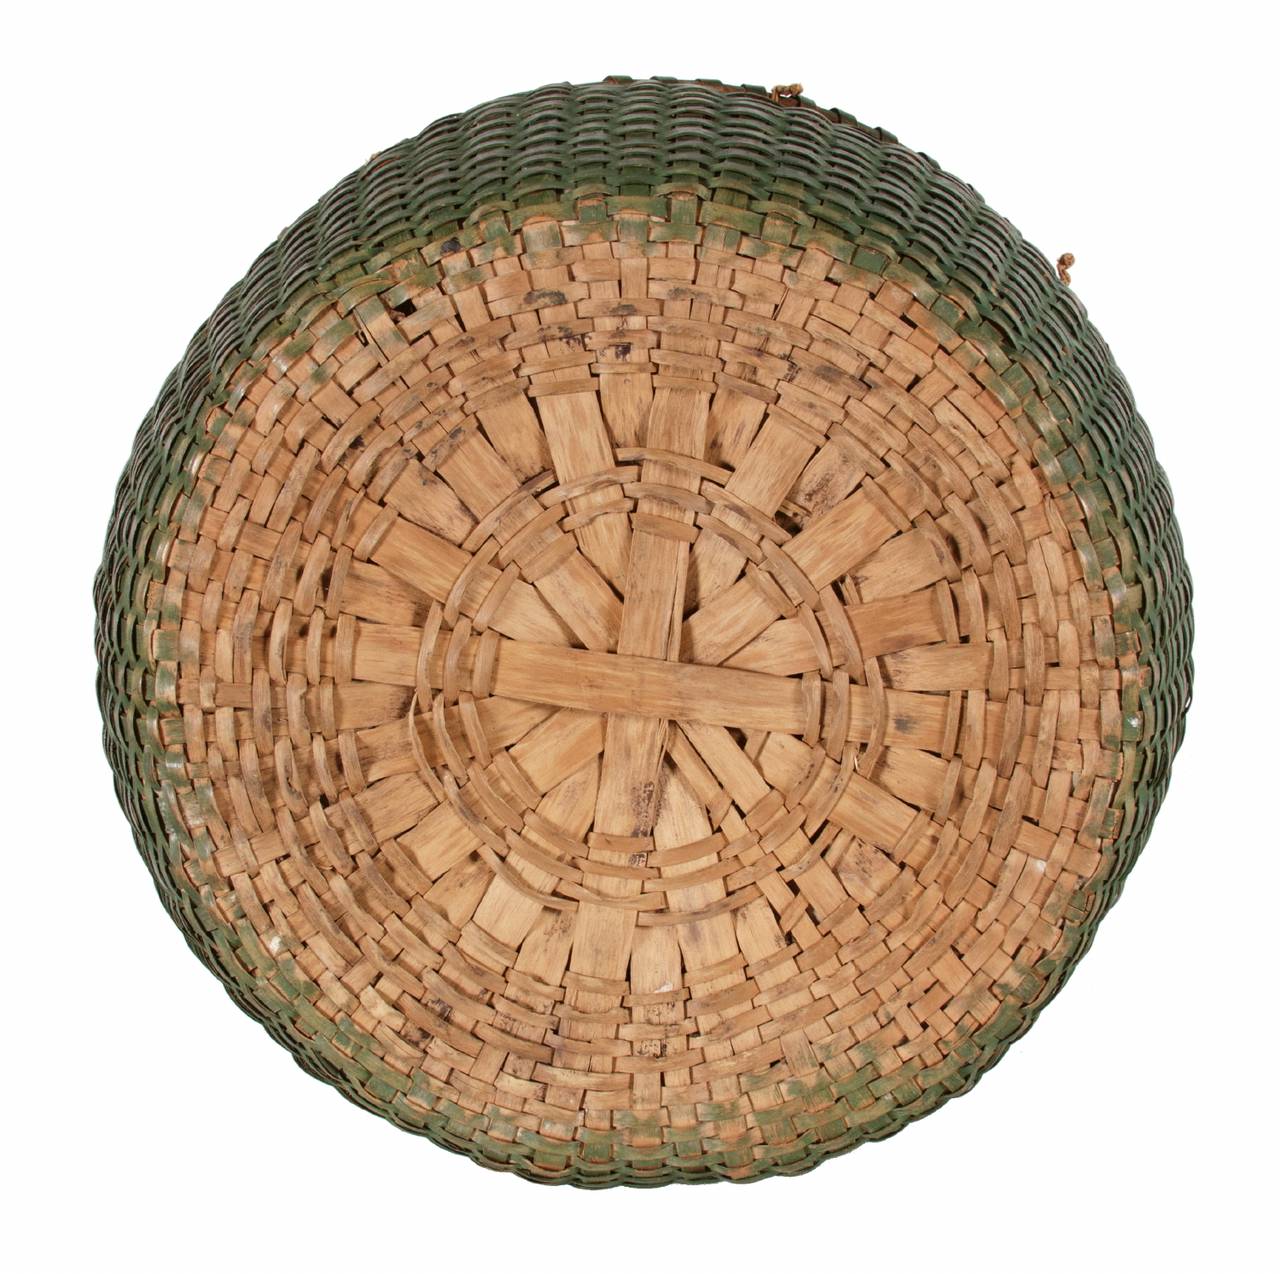 Wood Lidded and Lined Splint Basket in Green Paint, Late 19th Century